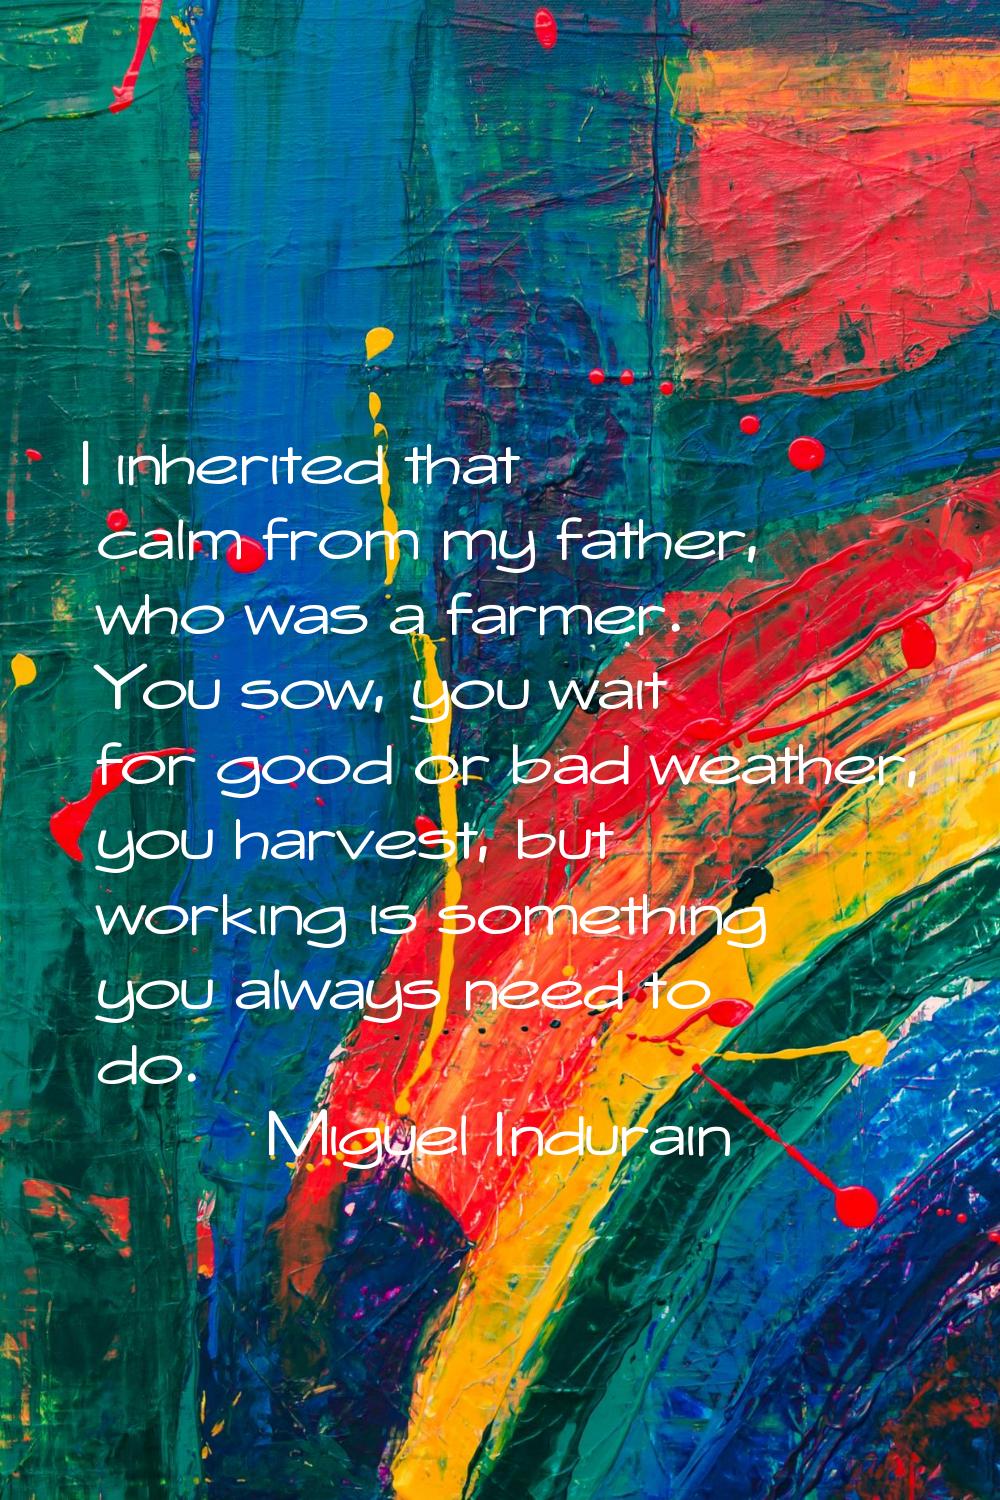 I inherited that calm from my father, who was a farmer. You sow, you wait for good or bad weather, 